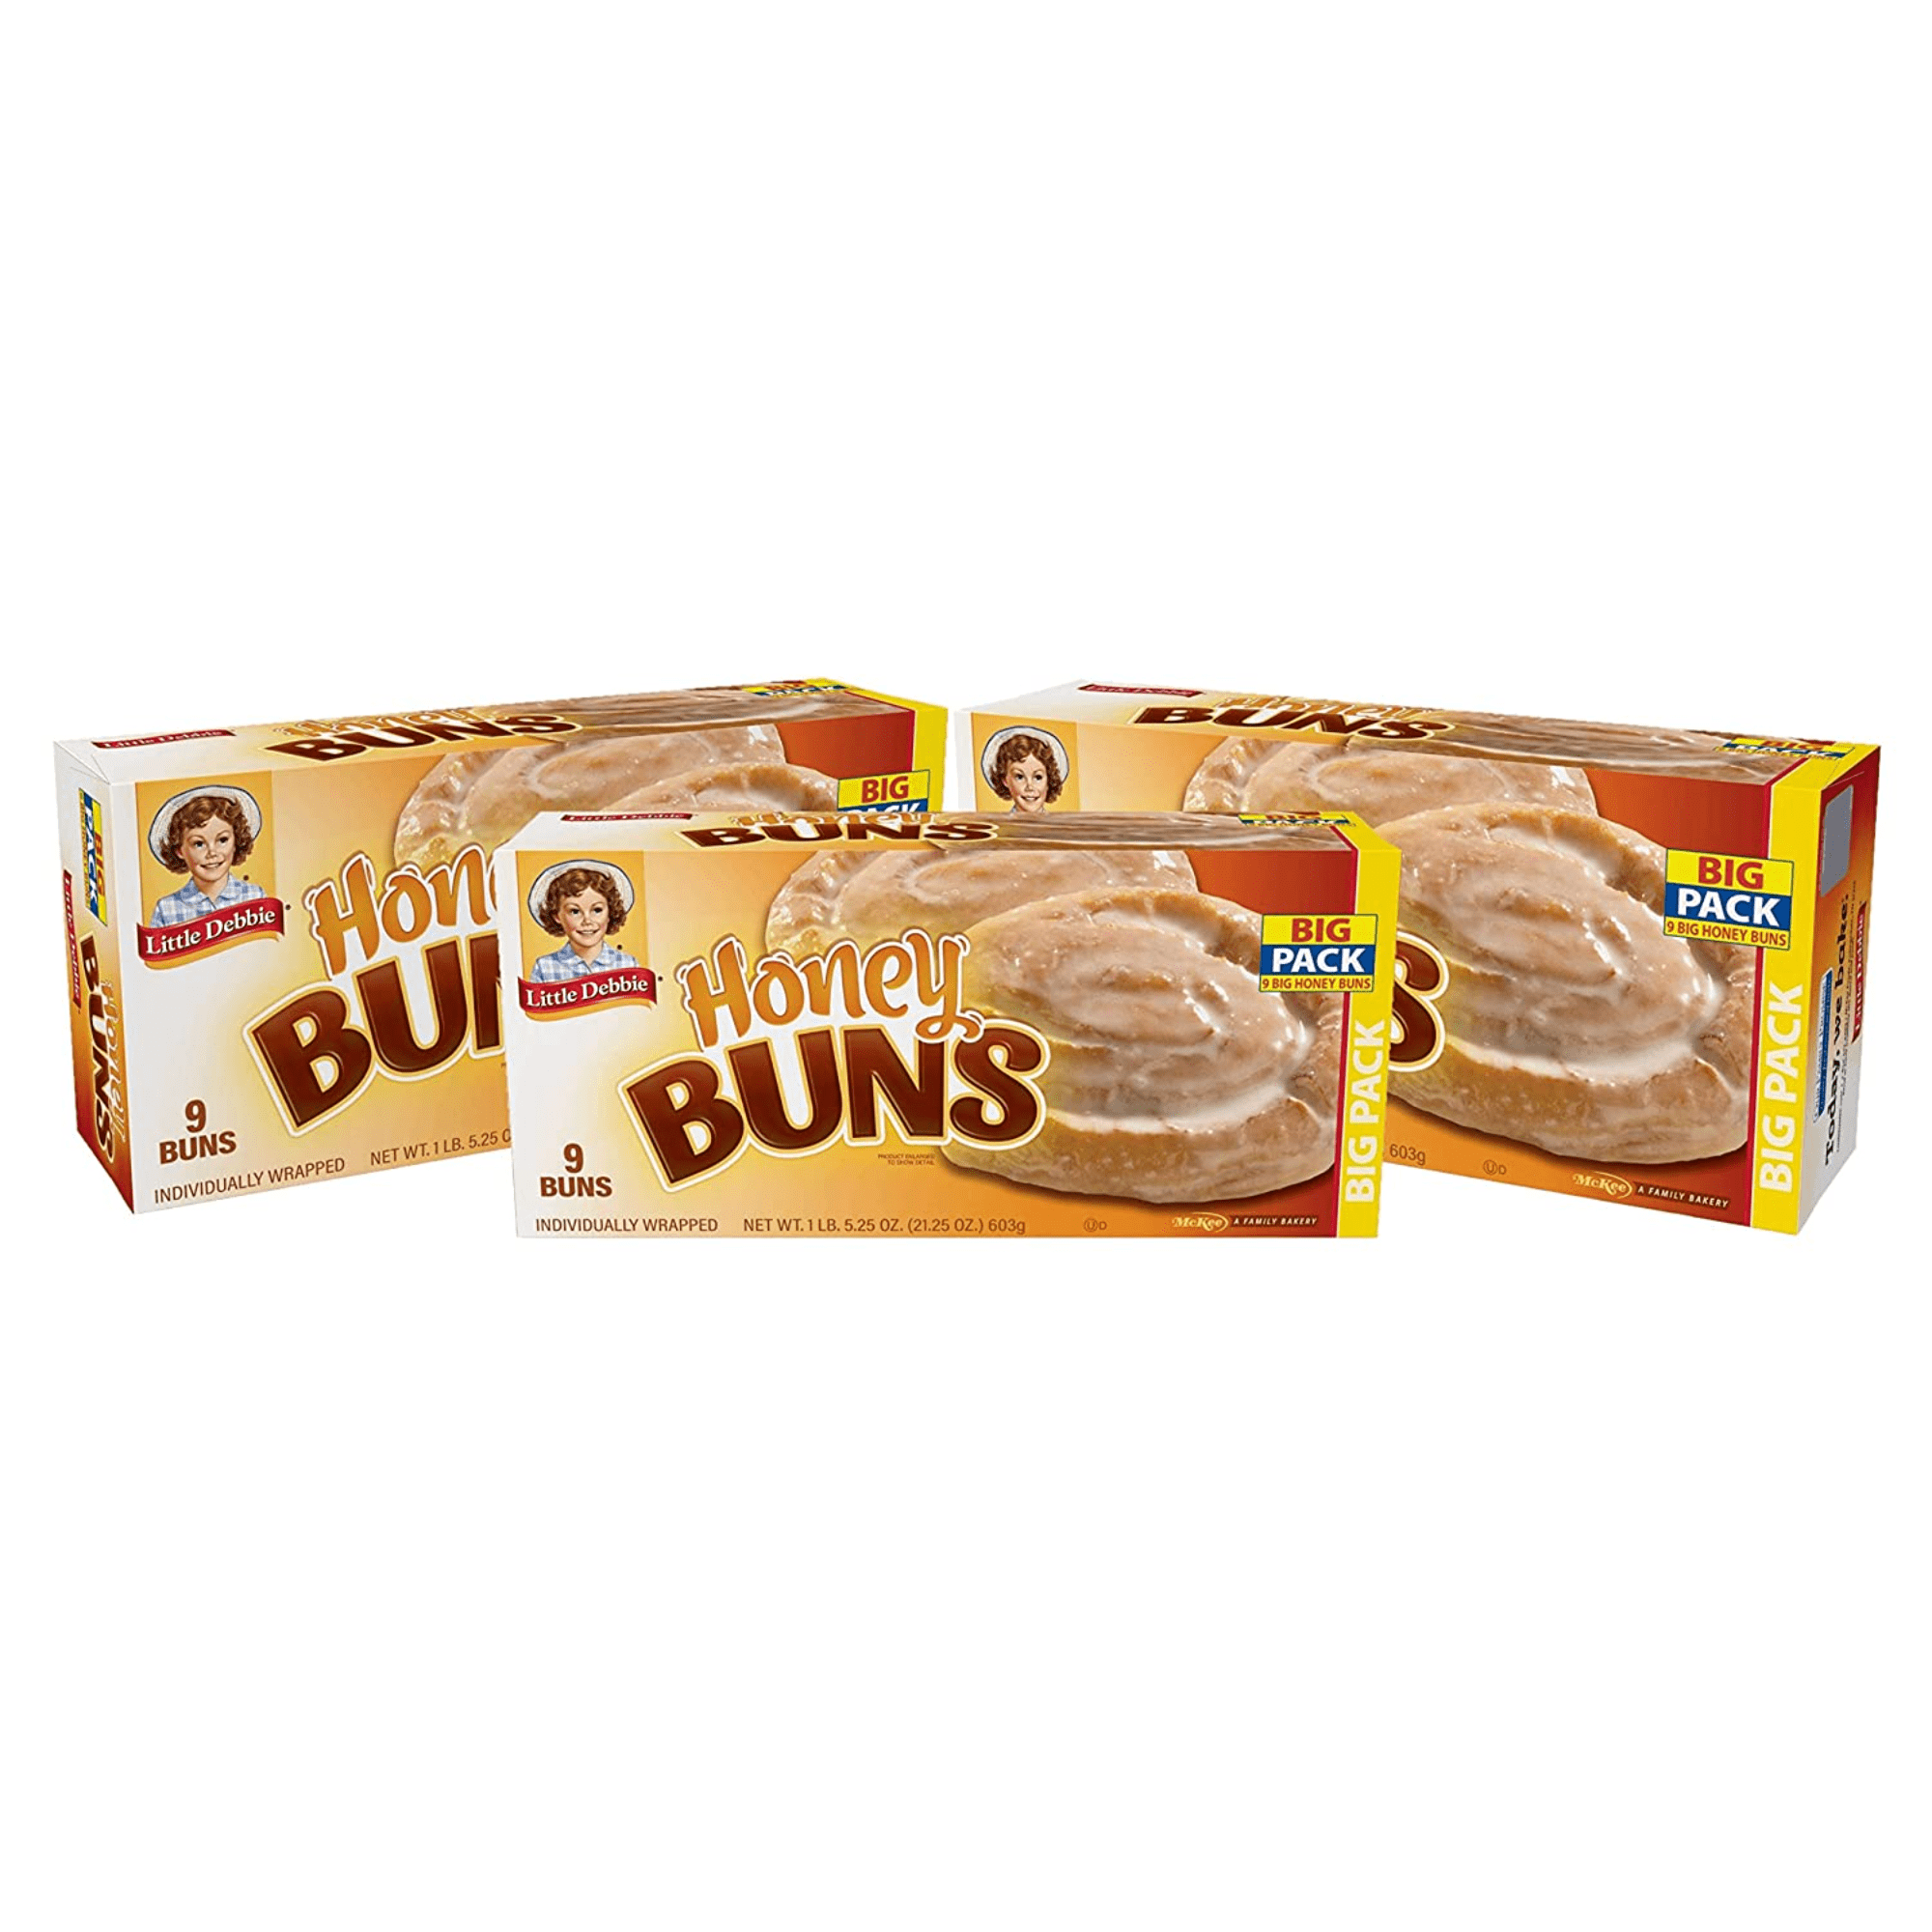 Little Debbie Honey Buns, 3 Big Pack Boxes, 36 Individually Wrapped Pastries